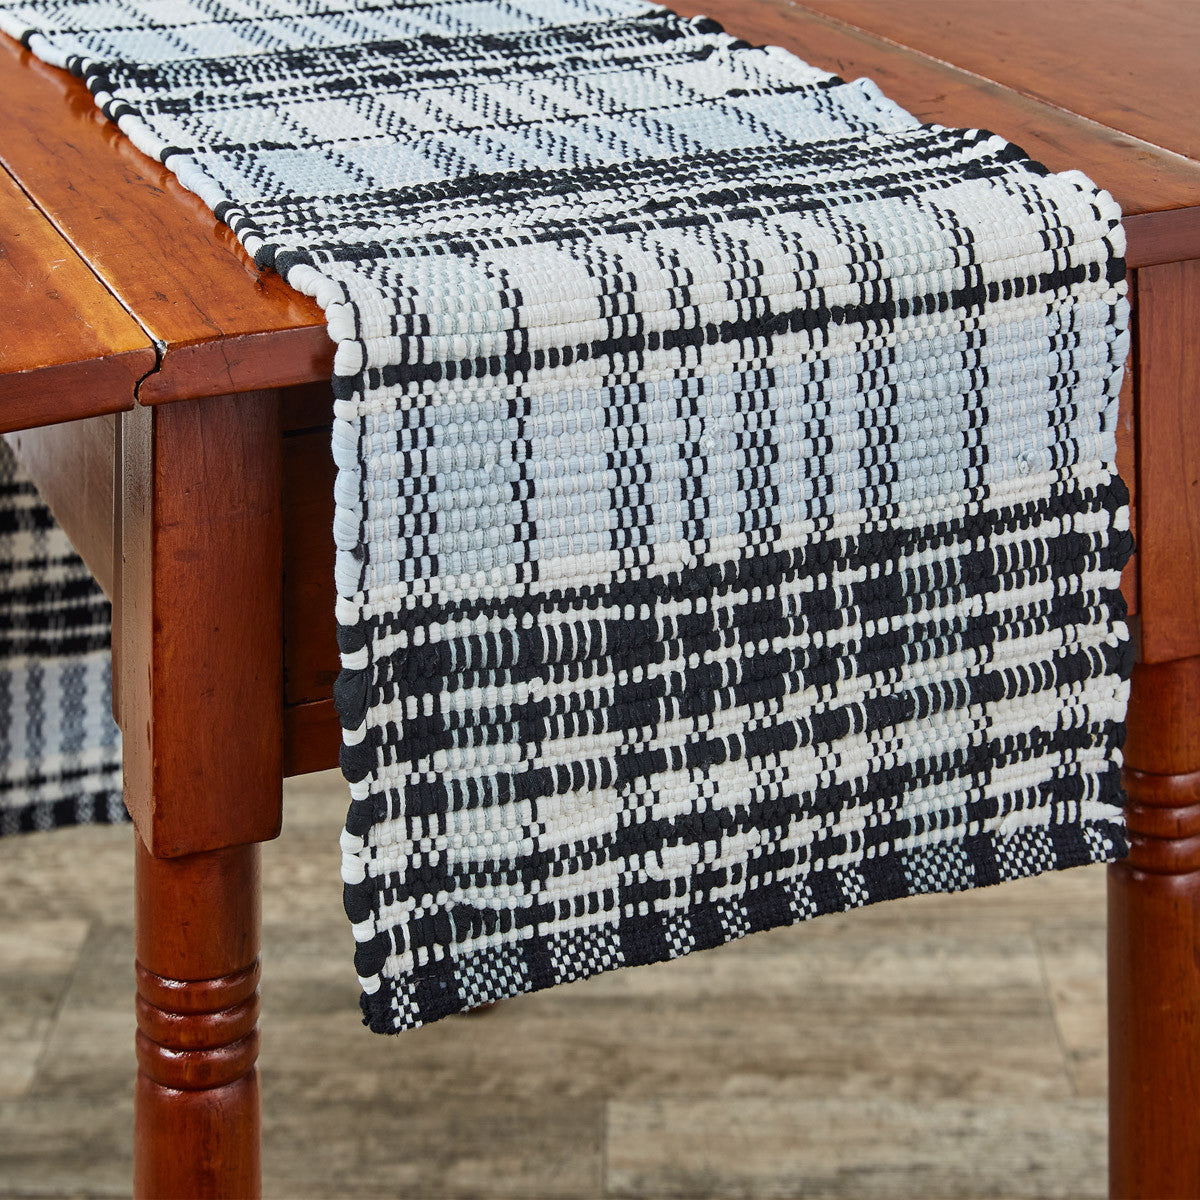 Refined Rustic Chindi Table Runner 72"L - Park Designs